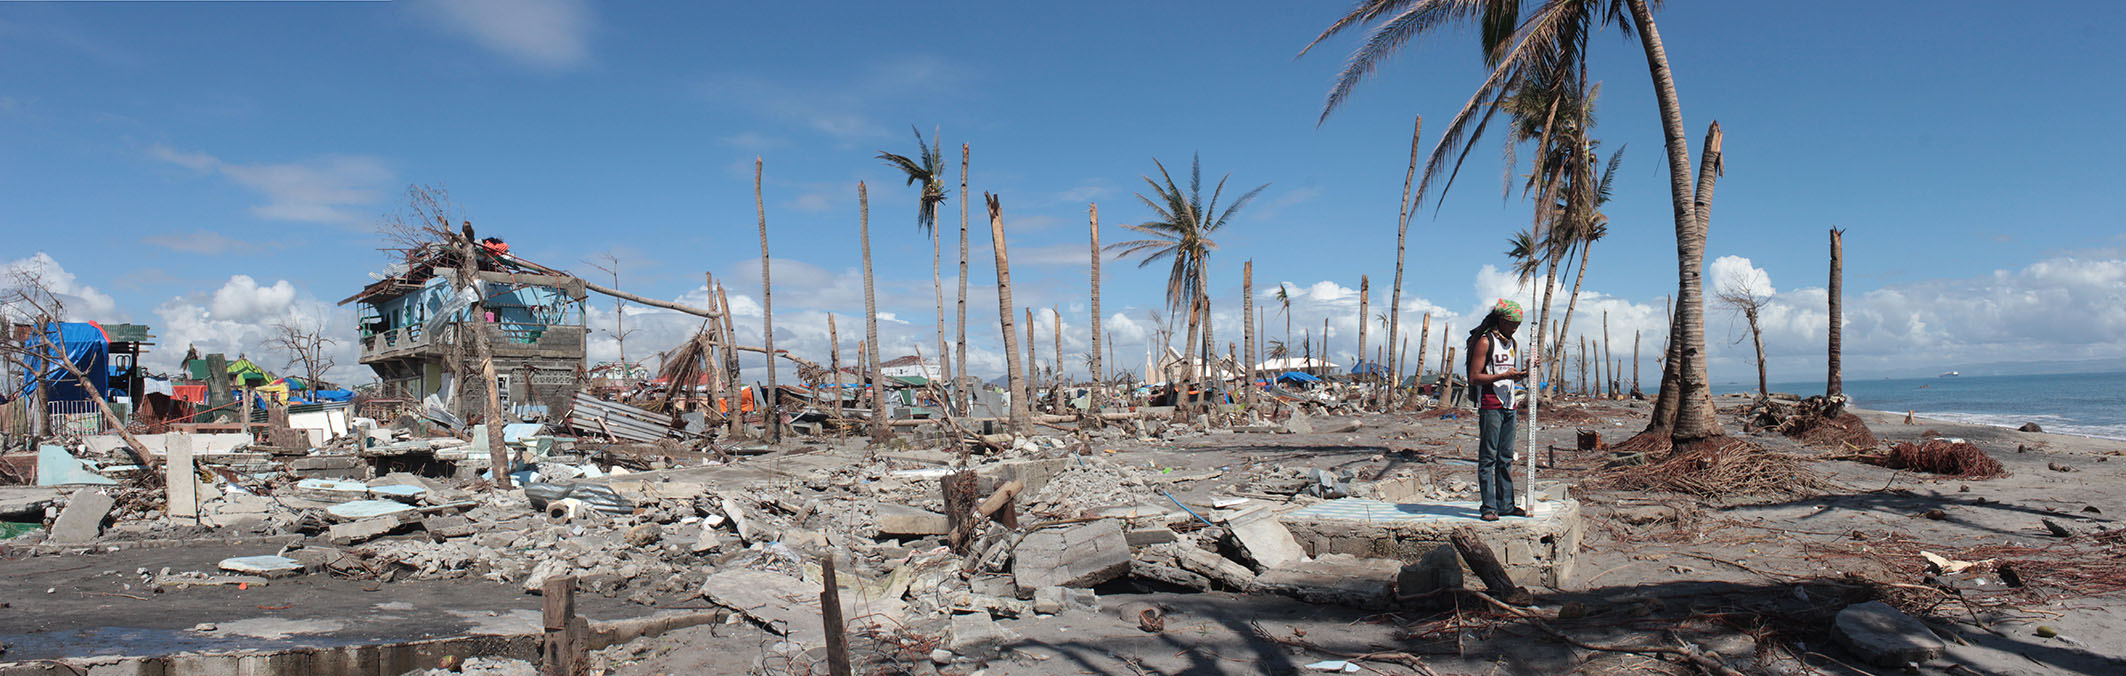 The aftermath of Typhoon Haiyan, which devastated the Philippines in November 2013. The eroded roots, the sand amongst the rubble, and the snapped trunks of the palms give clues to the scientists about the dynamics of the storm surge associated with the typhoon (Source: Lea Soria/ Earth Observatory of Singapore)